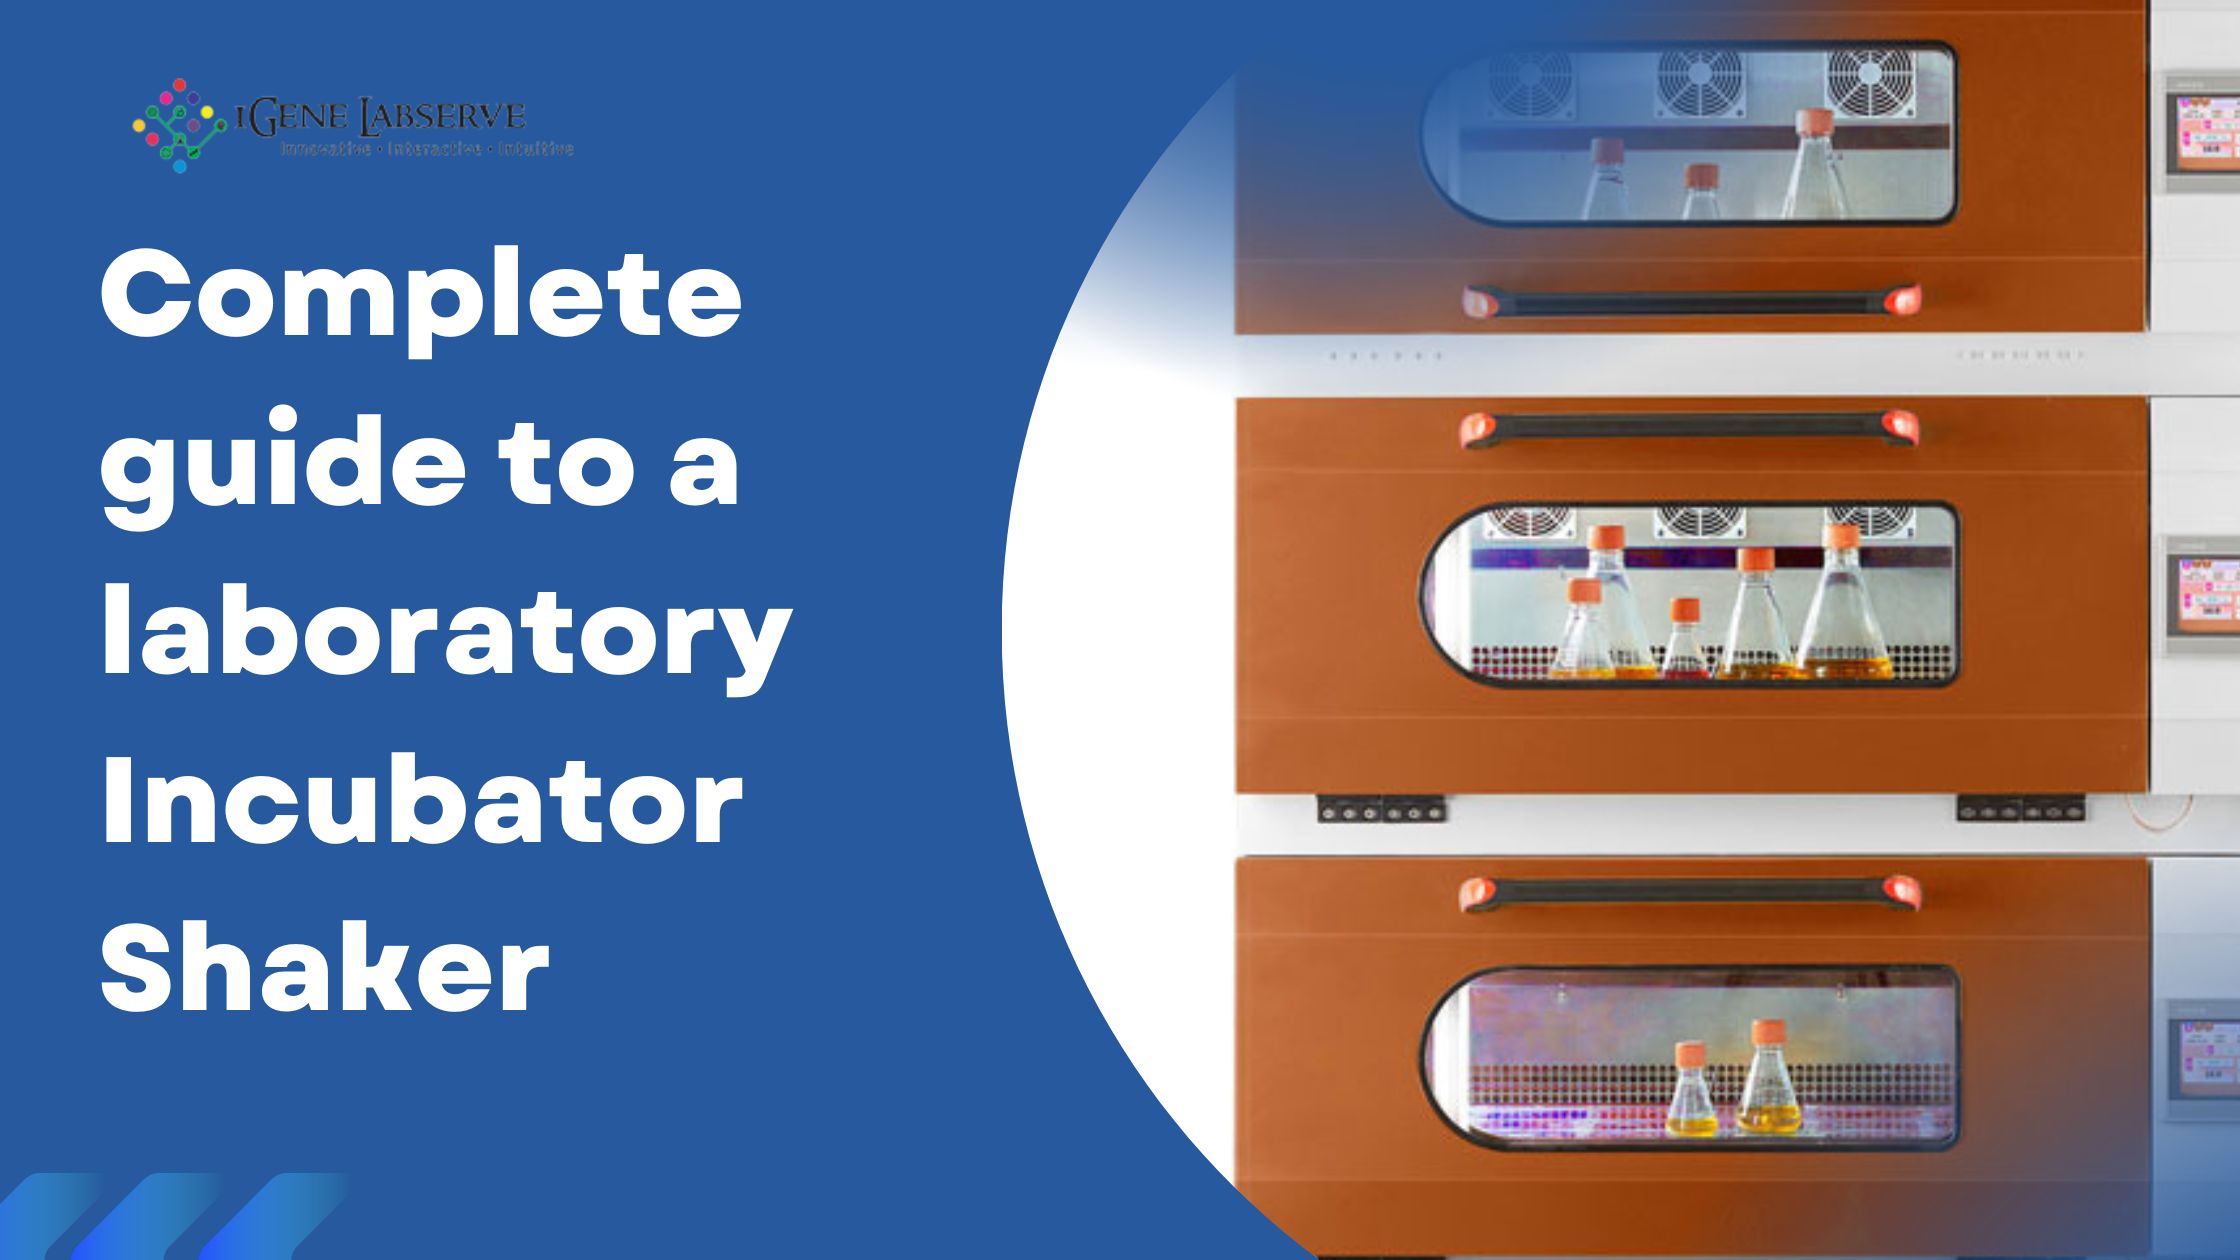 Complete guide to a laboratory Incubator Shaker